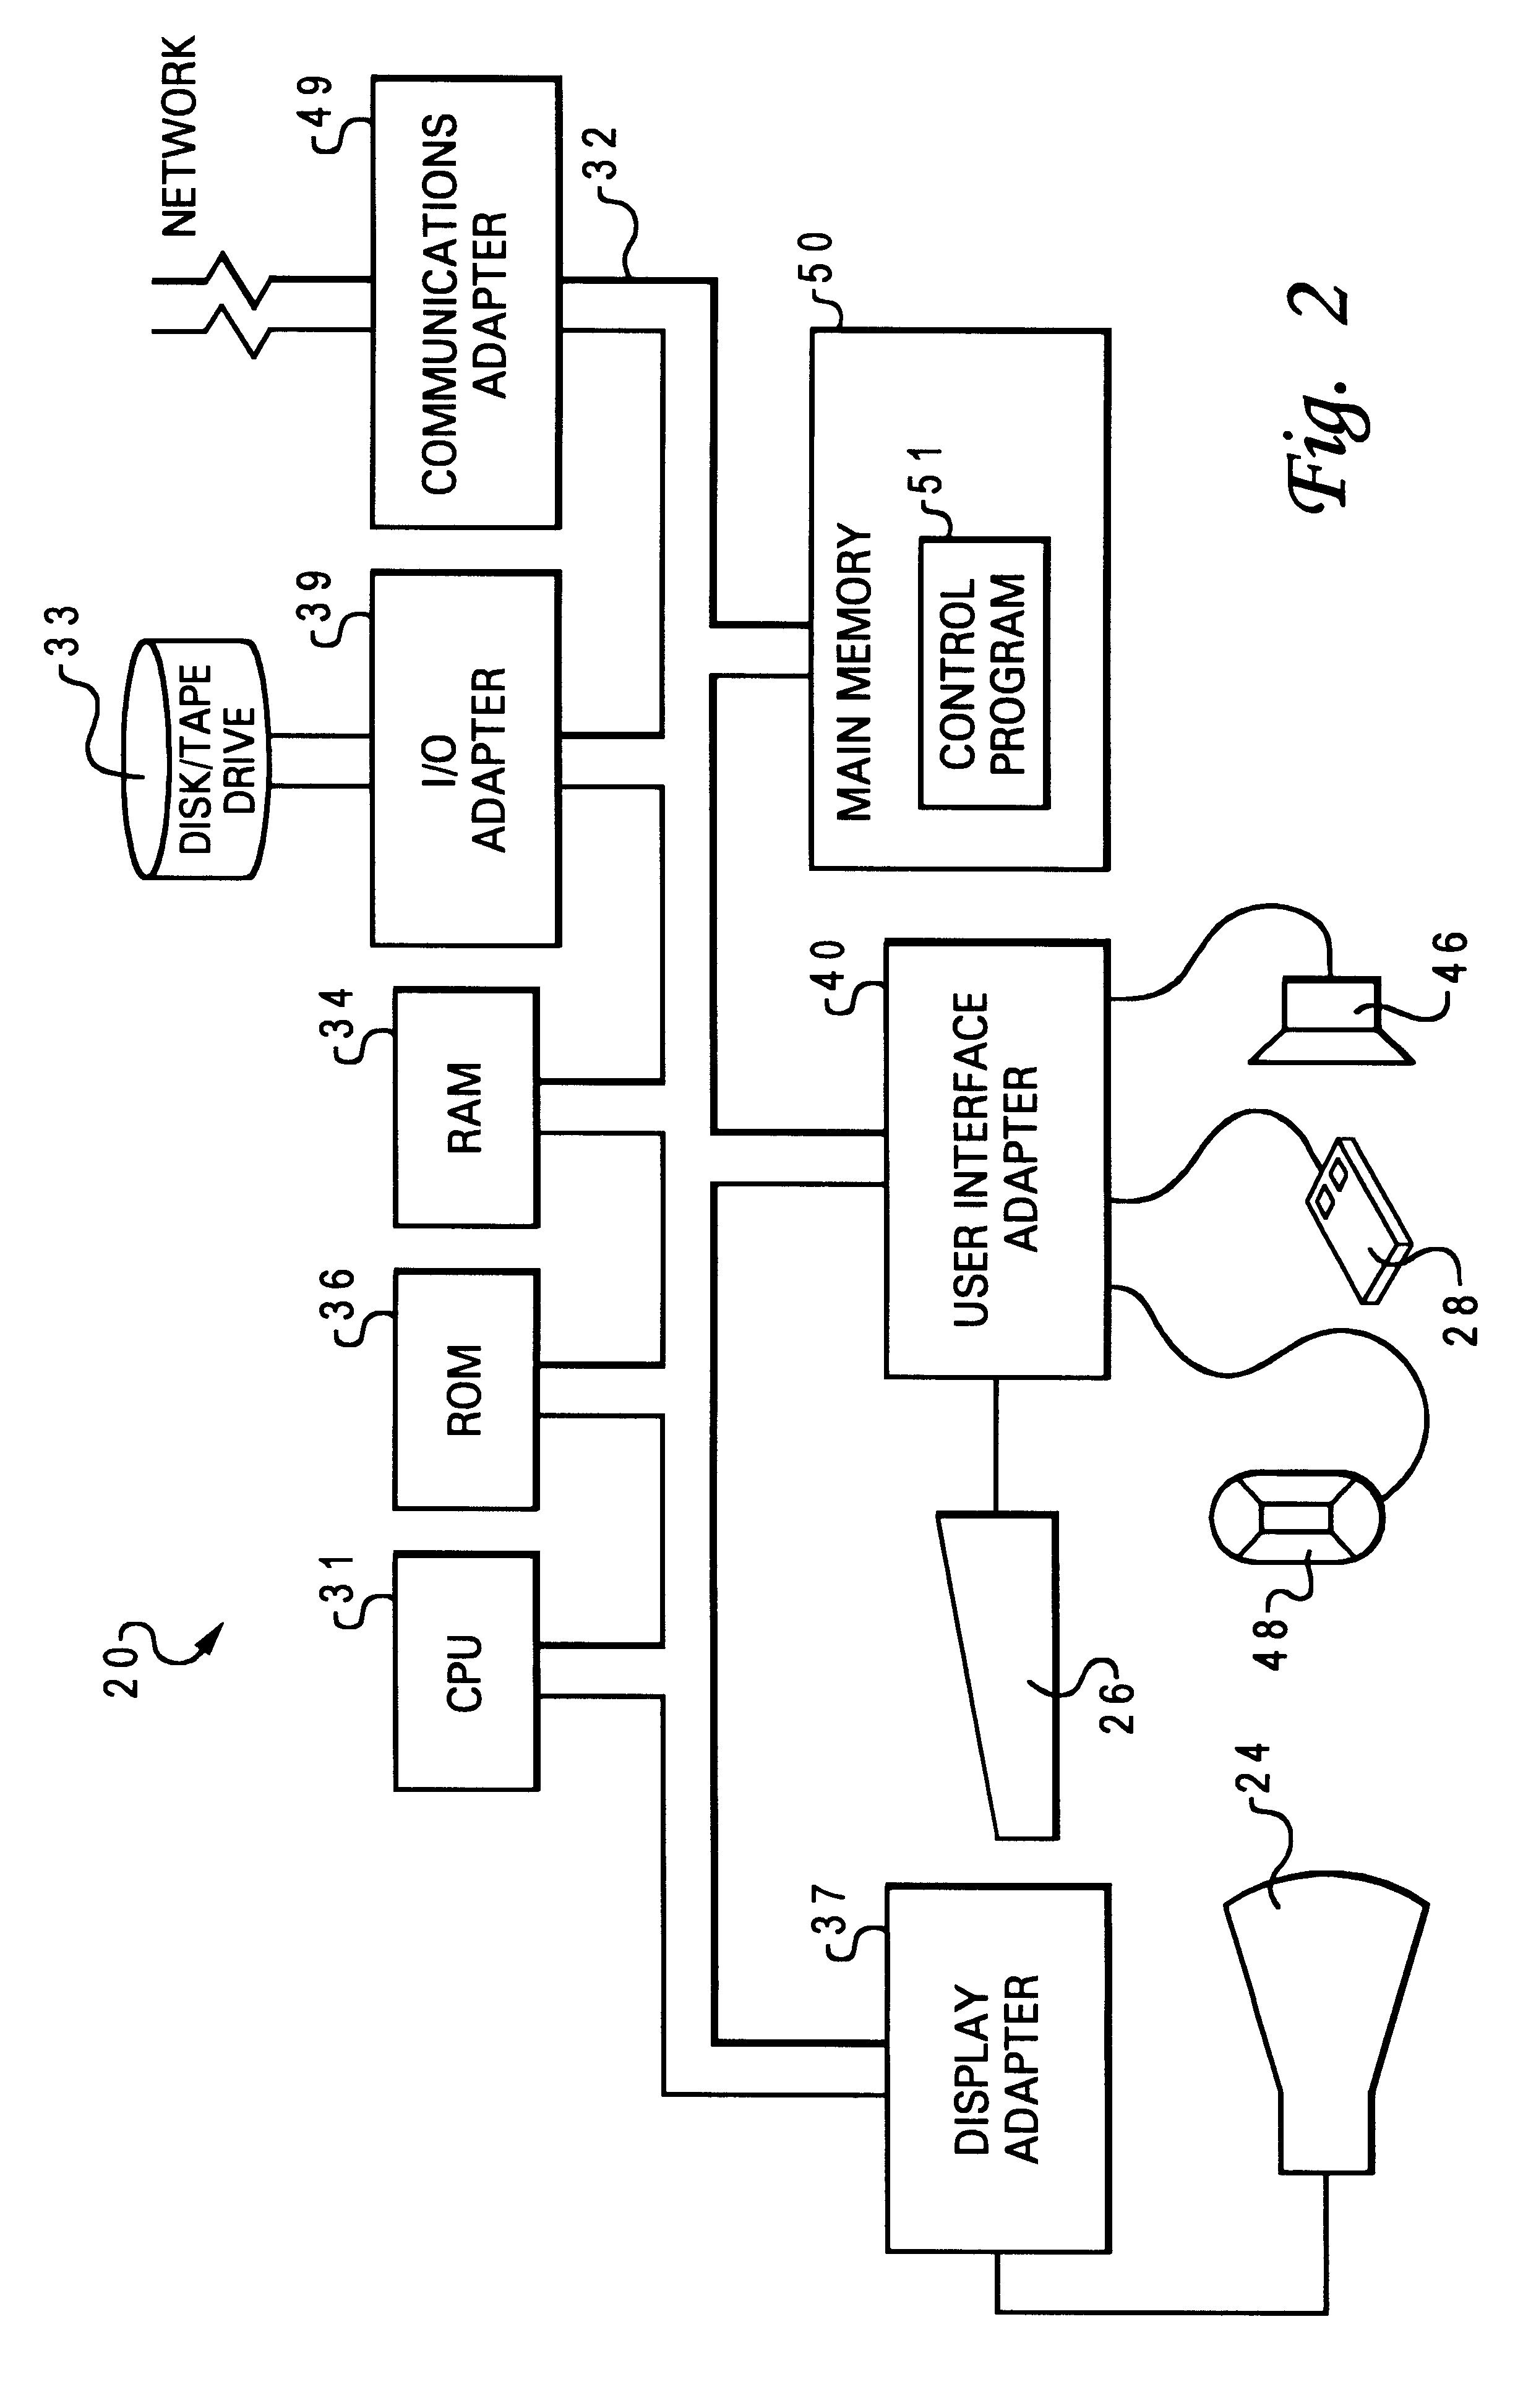 Method and system for monitoring computer performance utilizing sound diagnostics